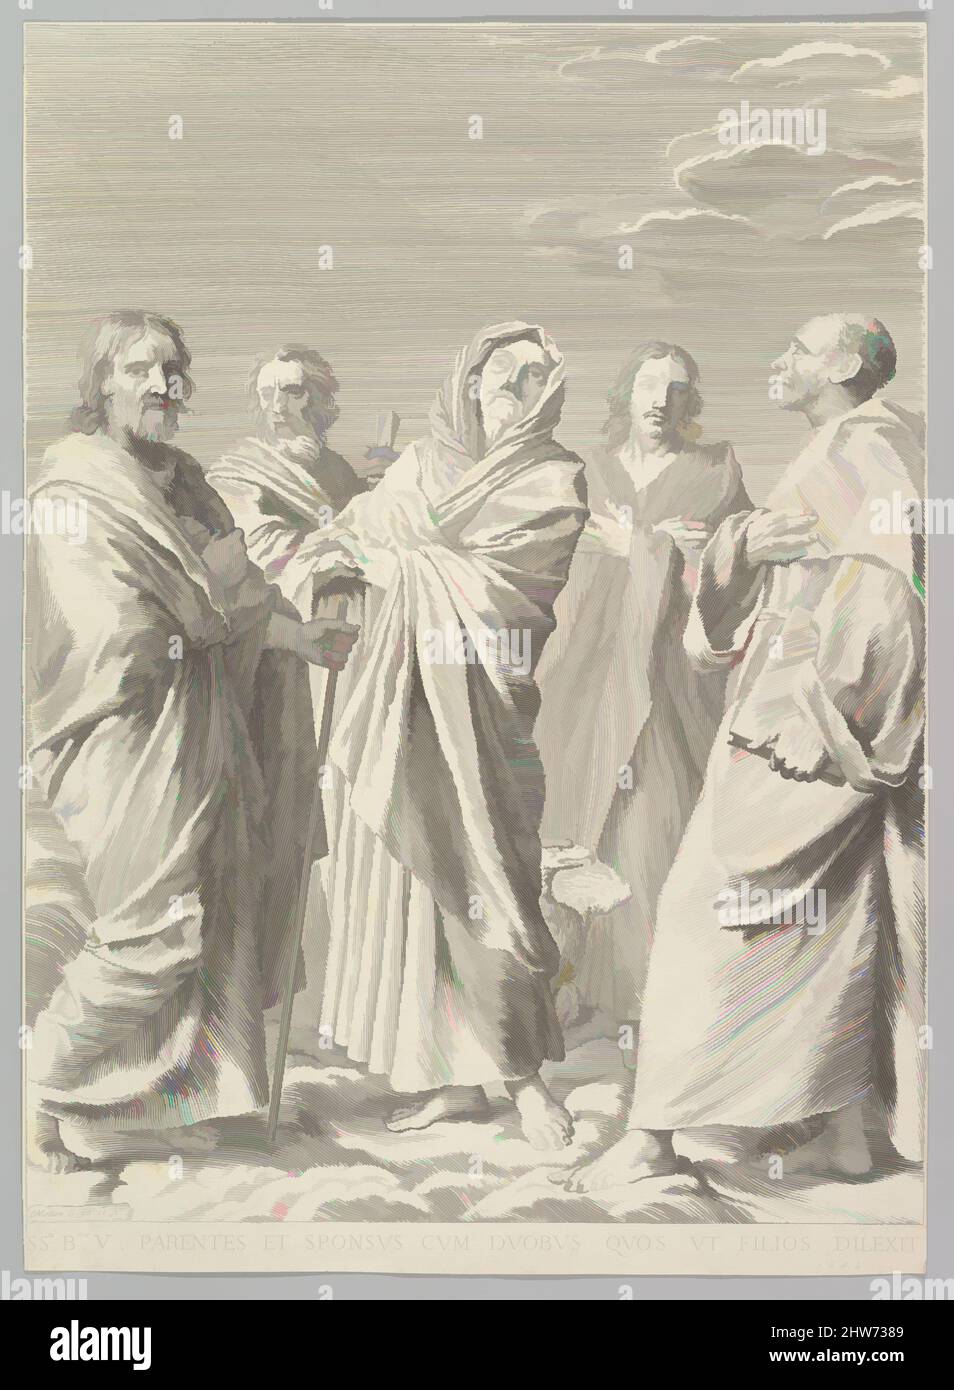 Art inspired by Sts. Anne, Joseph, Joachim, Bernard and John the Evangelist (Parenté de la Vierge), 1648, Engraving; second state of two (BN), sheet: 16 3/4 x 12 1/8 in. (42.5 x 30.8 cm), Prints, Claude Mellan (French, Abbeville 1598–1688 Paris, Classic works modernized by Artotop with a splash of modernity. Shapes, color and value, eye-catching visual impact on art. Emotions through freedom of artworks in a contemporary way. A timeless message pursuing a wildly creative new direction. Artists turning to the digital medium and creating the Artotop NFT Stock Photo